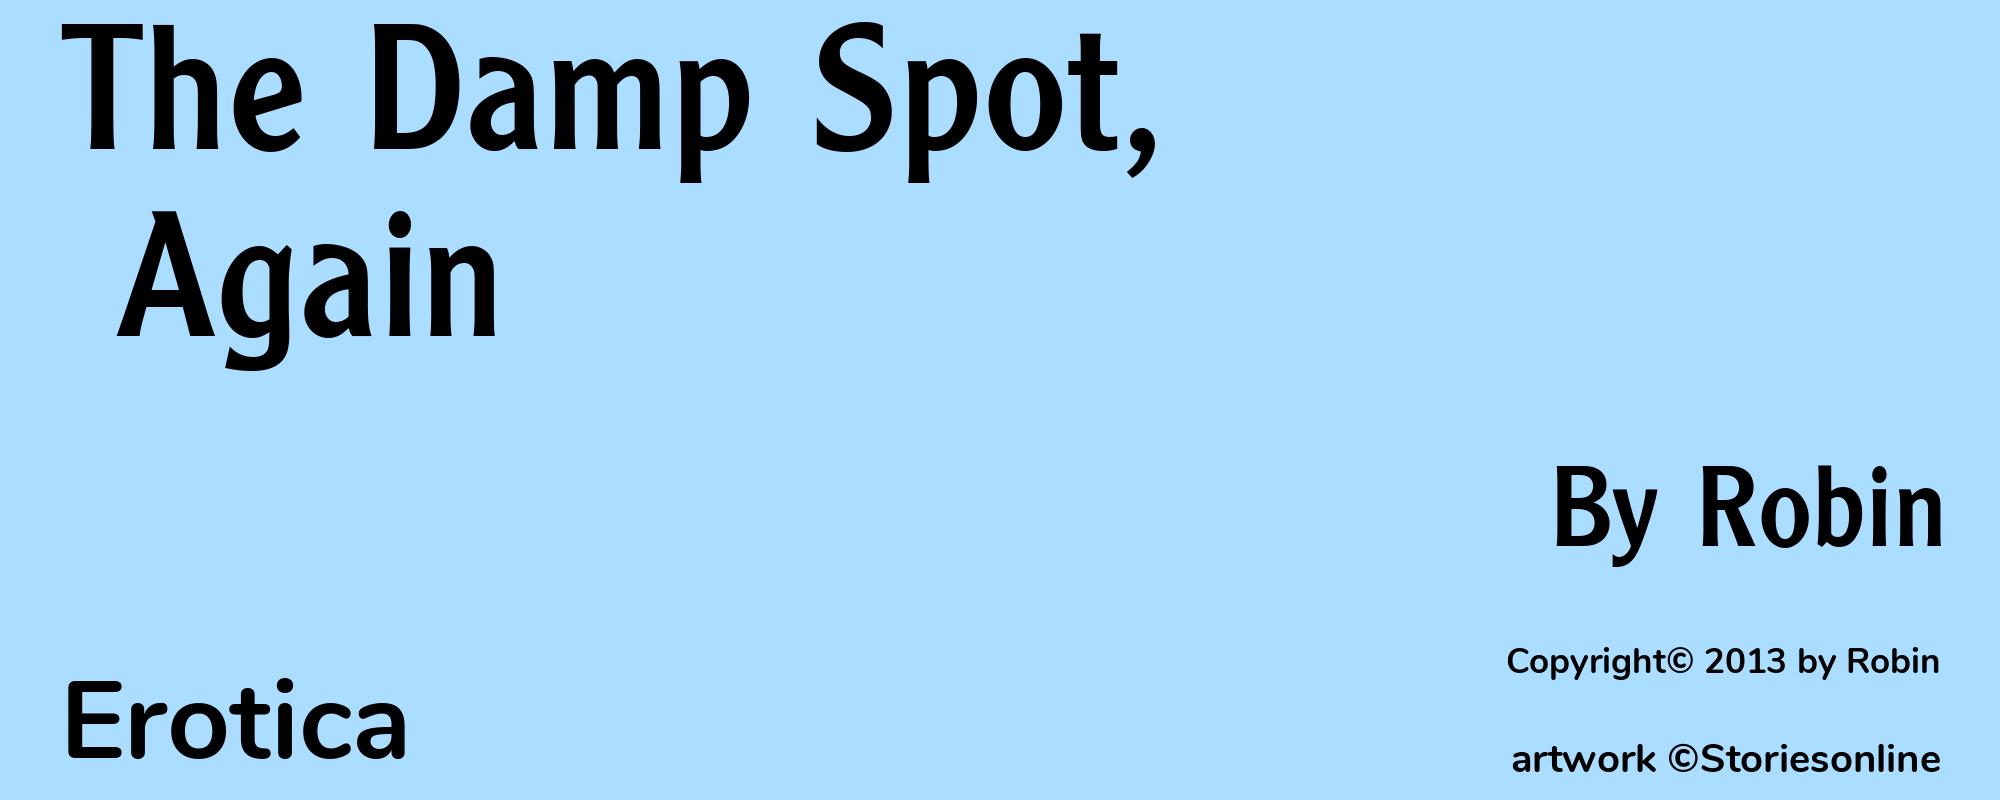 The Damp Spot, Again - Cover